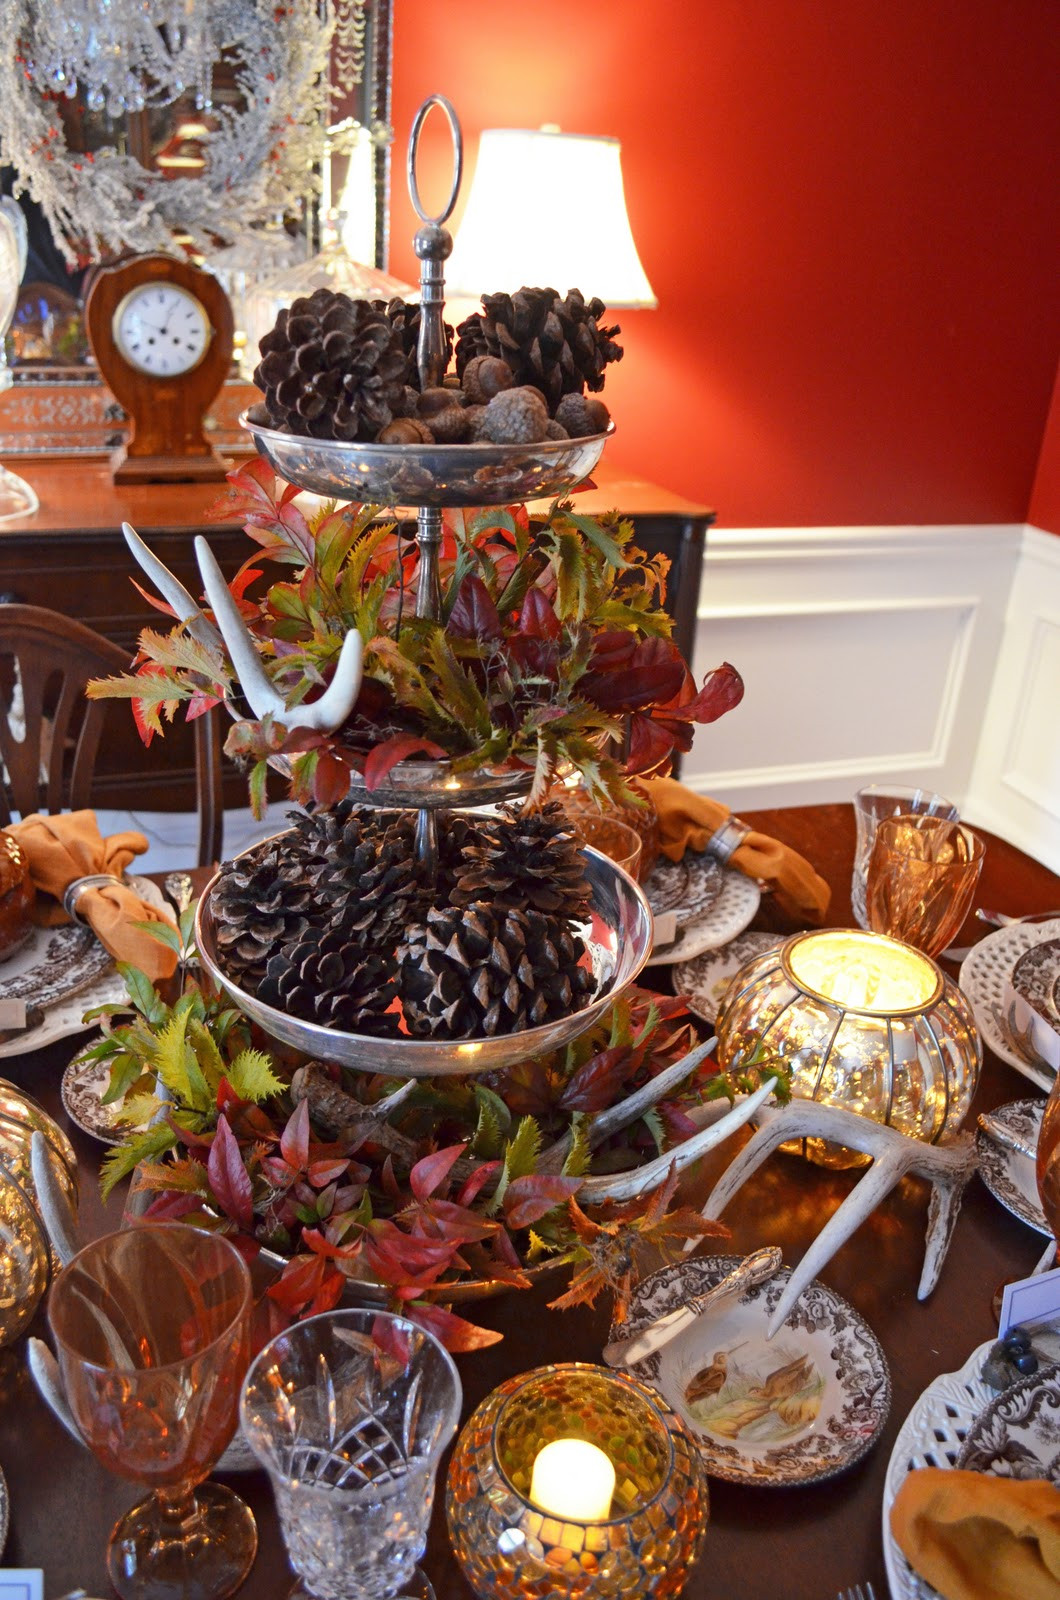 Thanksgiving Table Decoration Ideas
 Thanksgiving Table Setting with Nature Themed Centepiece